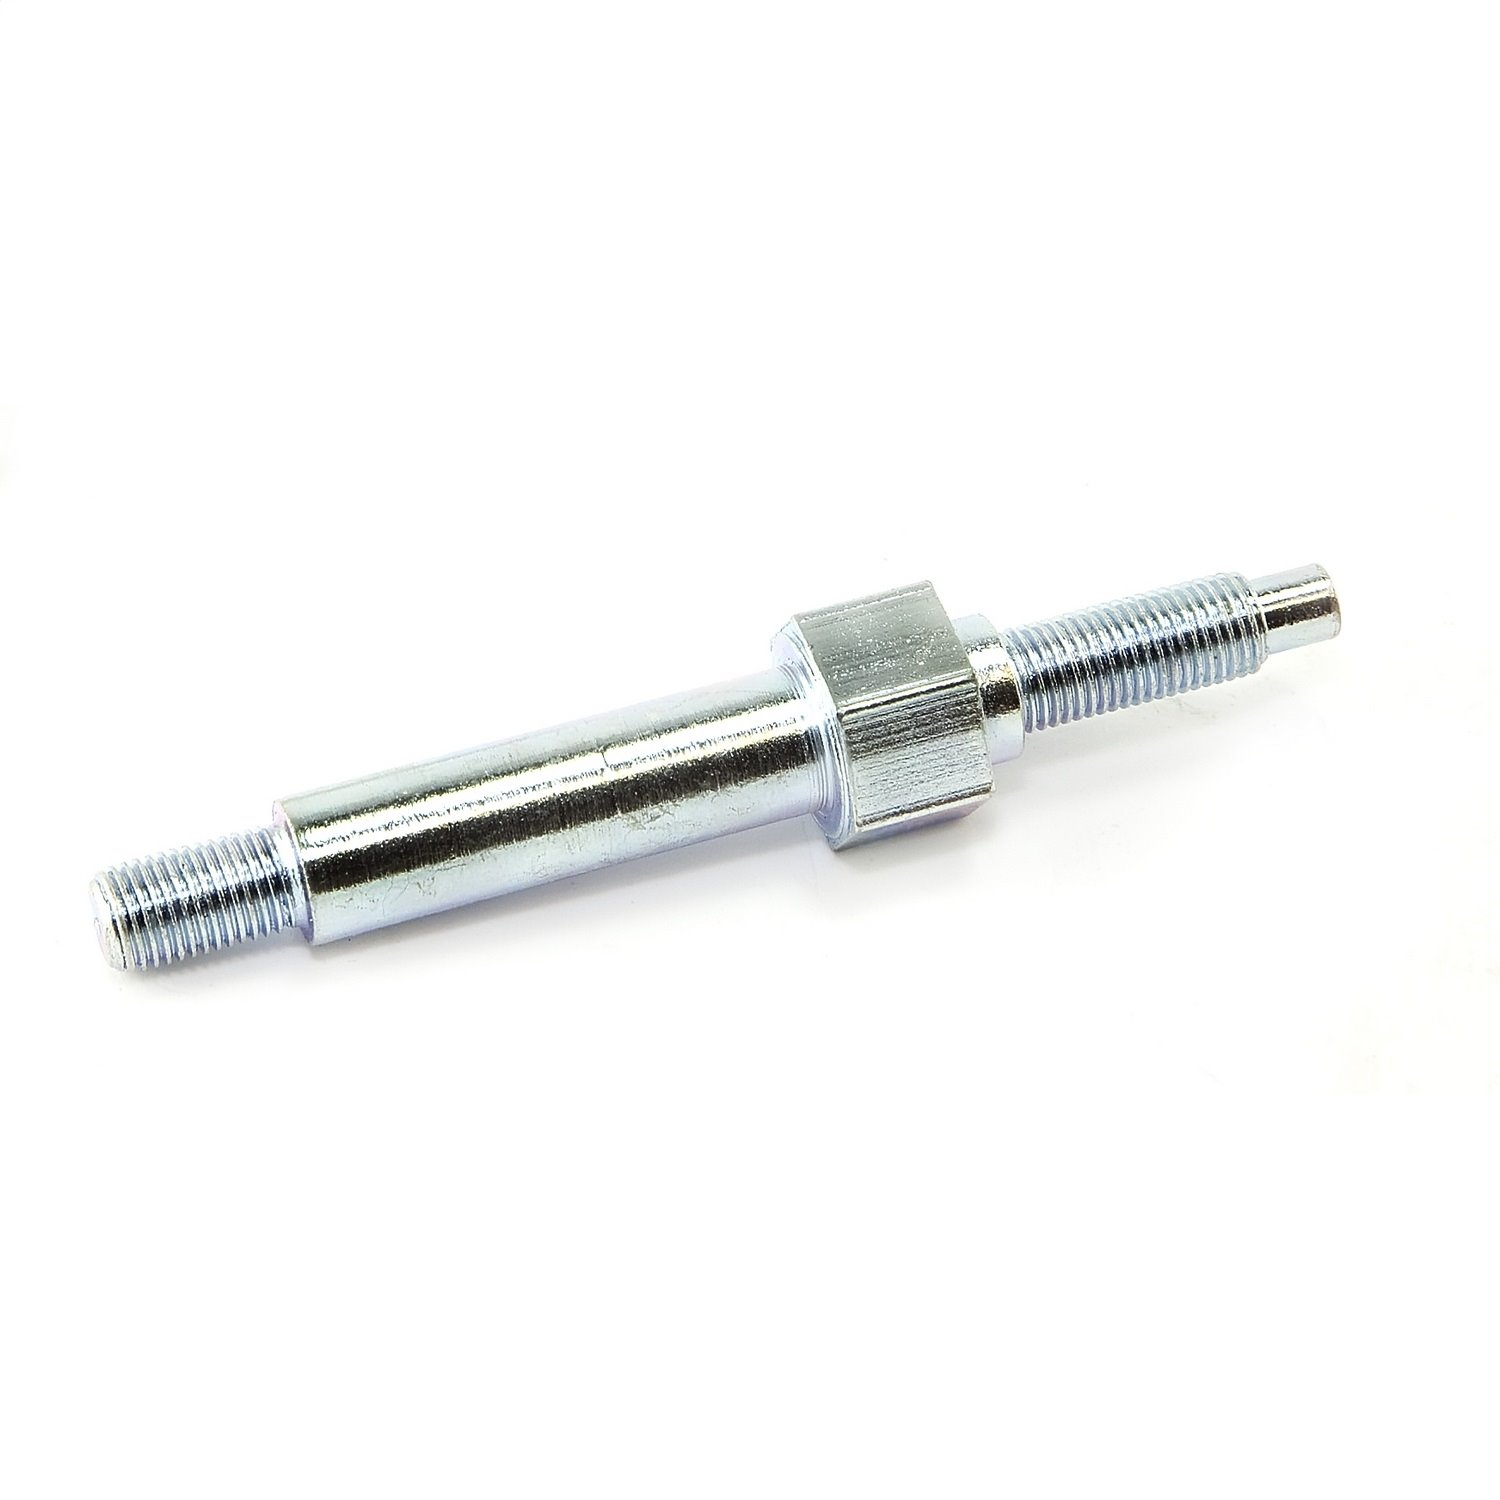 This transmission stabilizer stud from Omix-ADA fits 72-86 Jeep CJs 76-90 SJ SUVs and J-Series trucks and 87-95 Wrangler YJ .